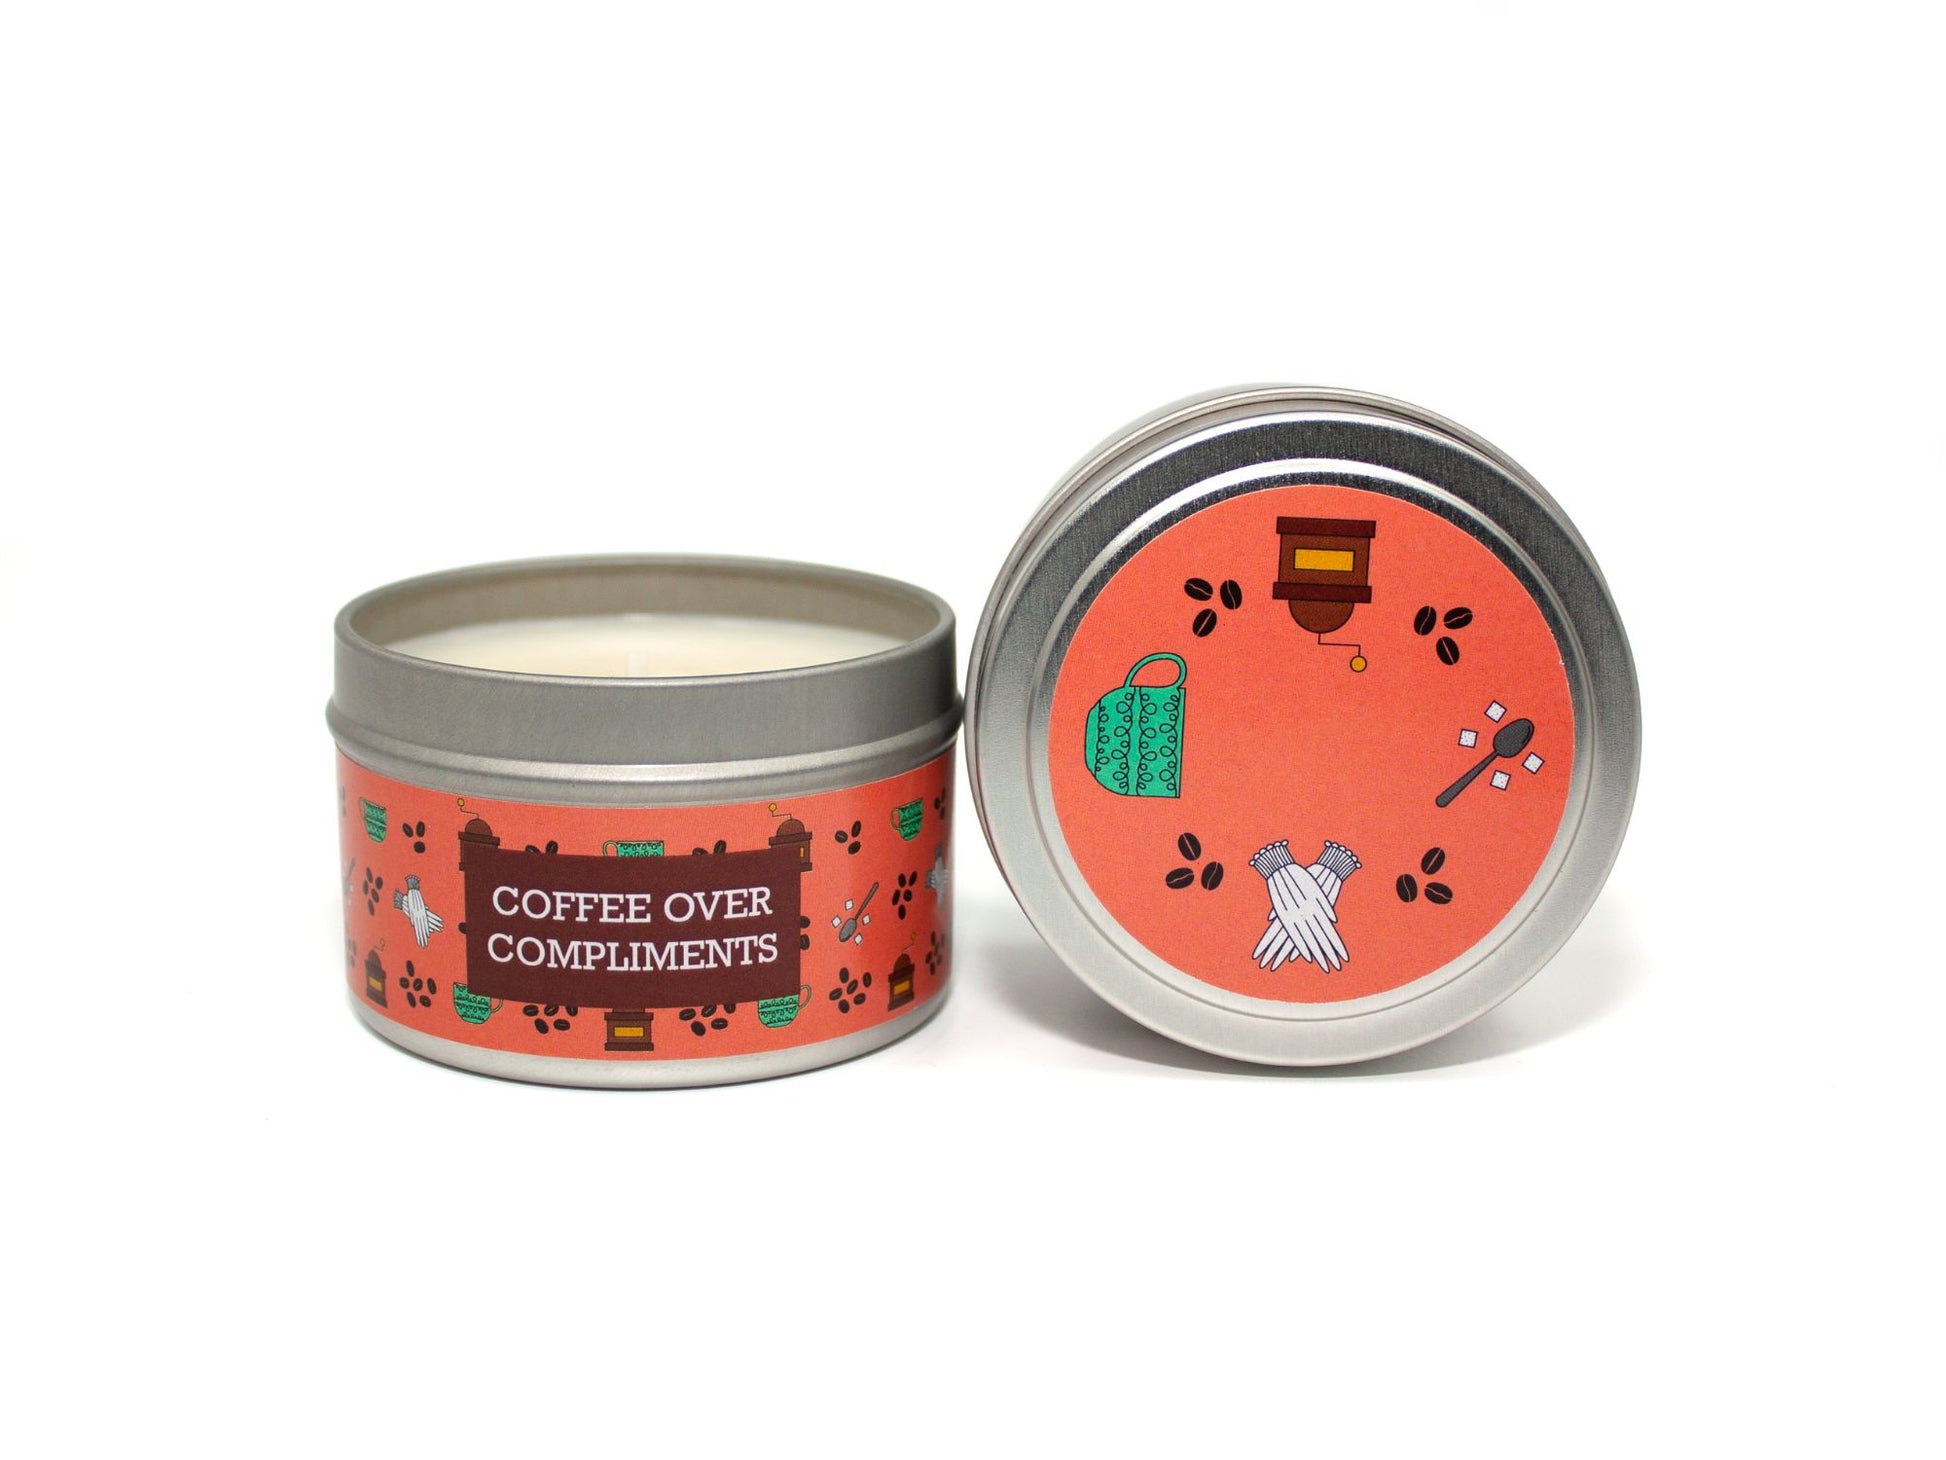 Onset & Rime cappucino scented candle called "Coffee Over Compliments" in a 4 oz silver tin. The circular label on top is coral with a pattern of coffee beans, a coffee grinder, white gloves and a spoon with sugar cubes. The text on the front label is "Coffee Over Compliments - Espresso, Steamed Milk, Cinnamon".